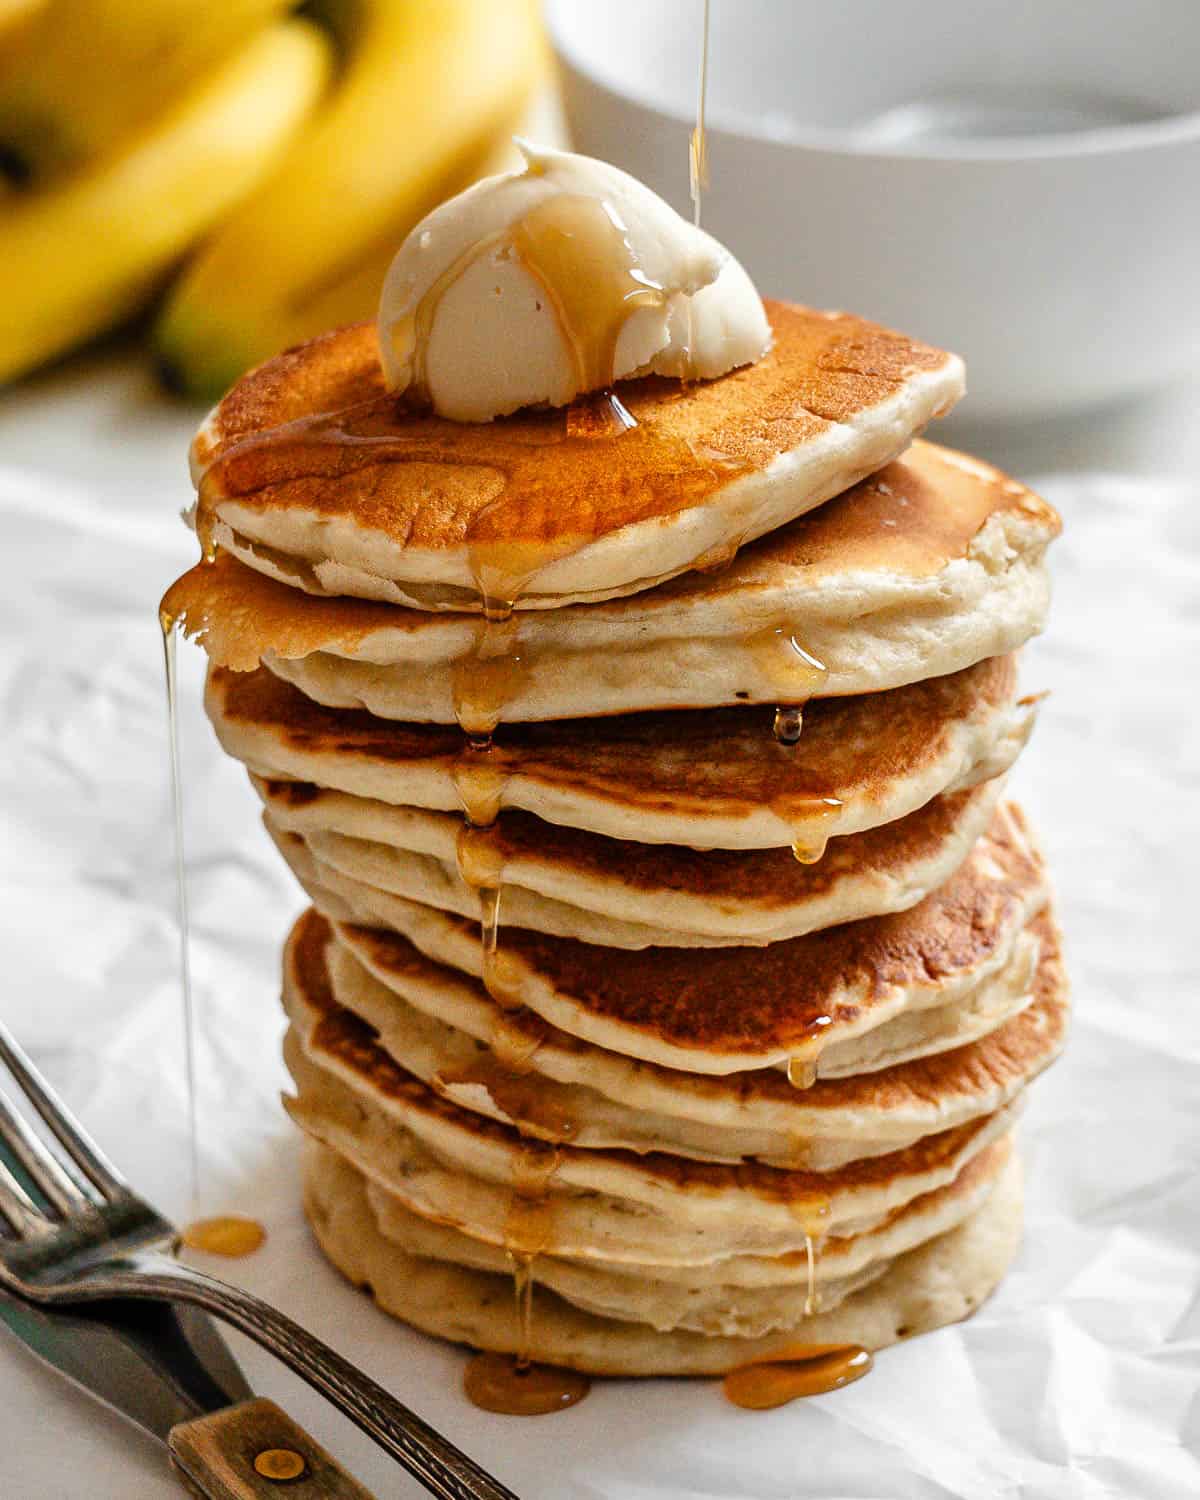 completed stack of pancakes a،nst a white surface